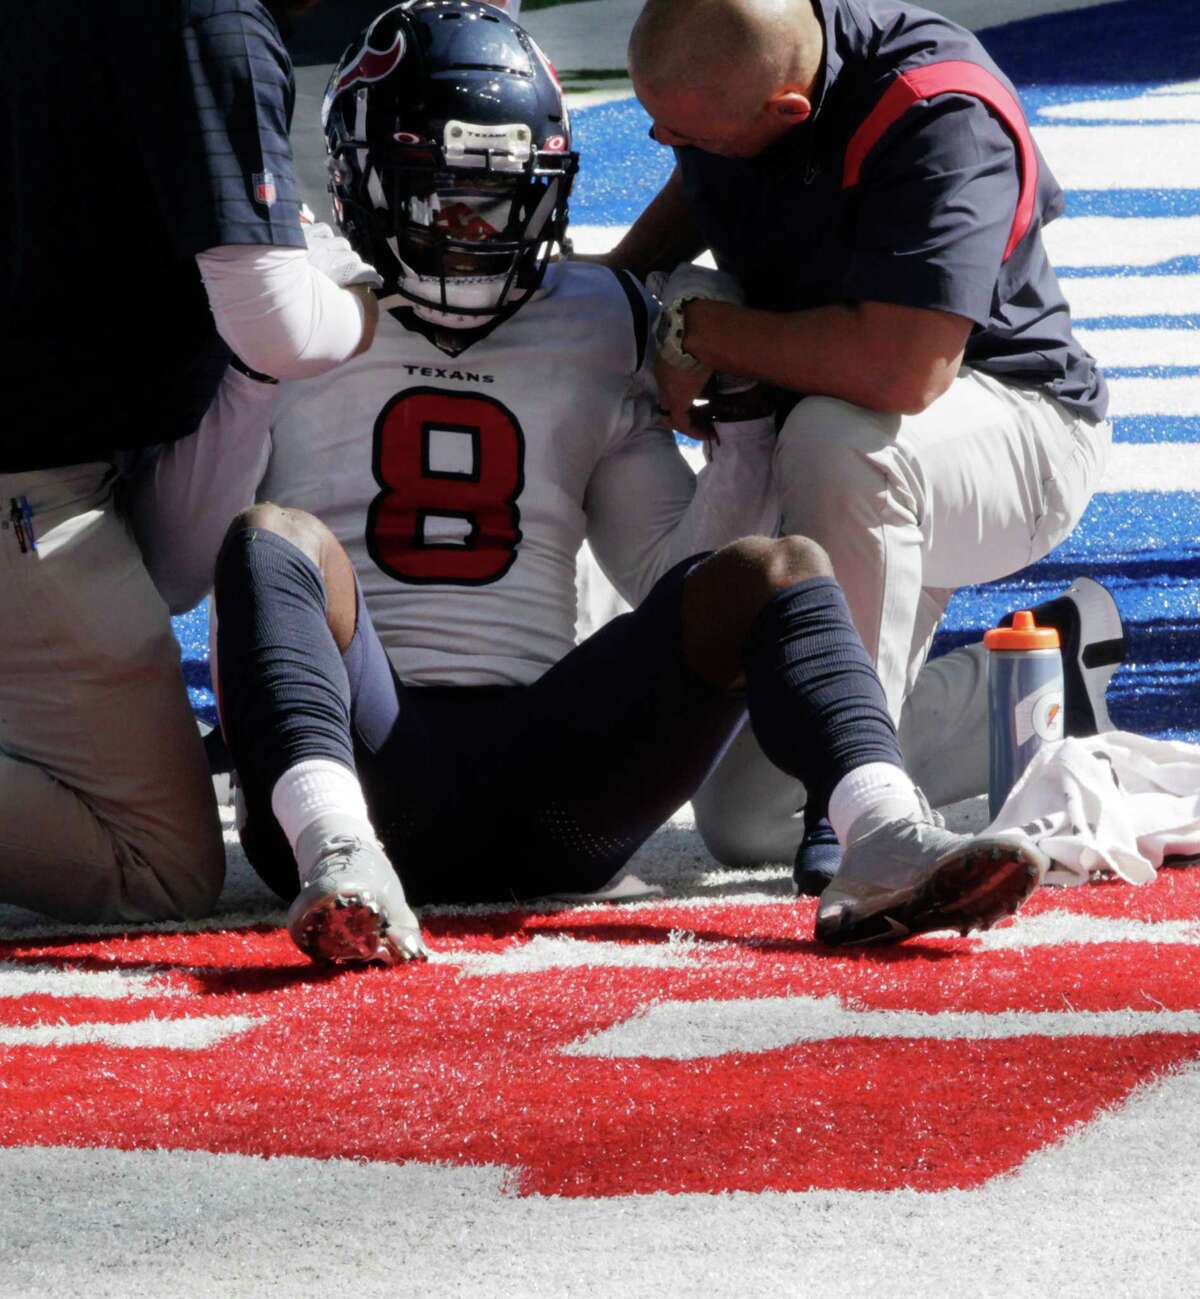 Houston Texans defensive back Terrence Brooks (8) is assisted up after getting hit during a Indianapolis Colts touchdown in the first quarter at Lucas Oil Stadium in Indianapolis on Sunday, Oct. 17, 2021. Indianapolis Colts won the game 31-3.